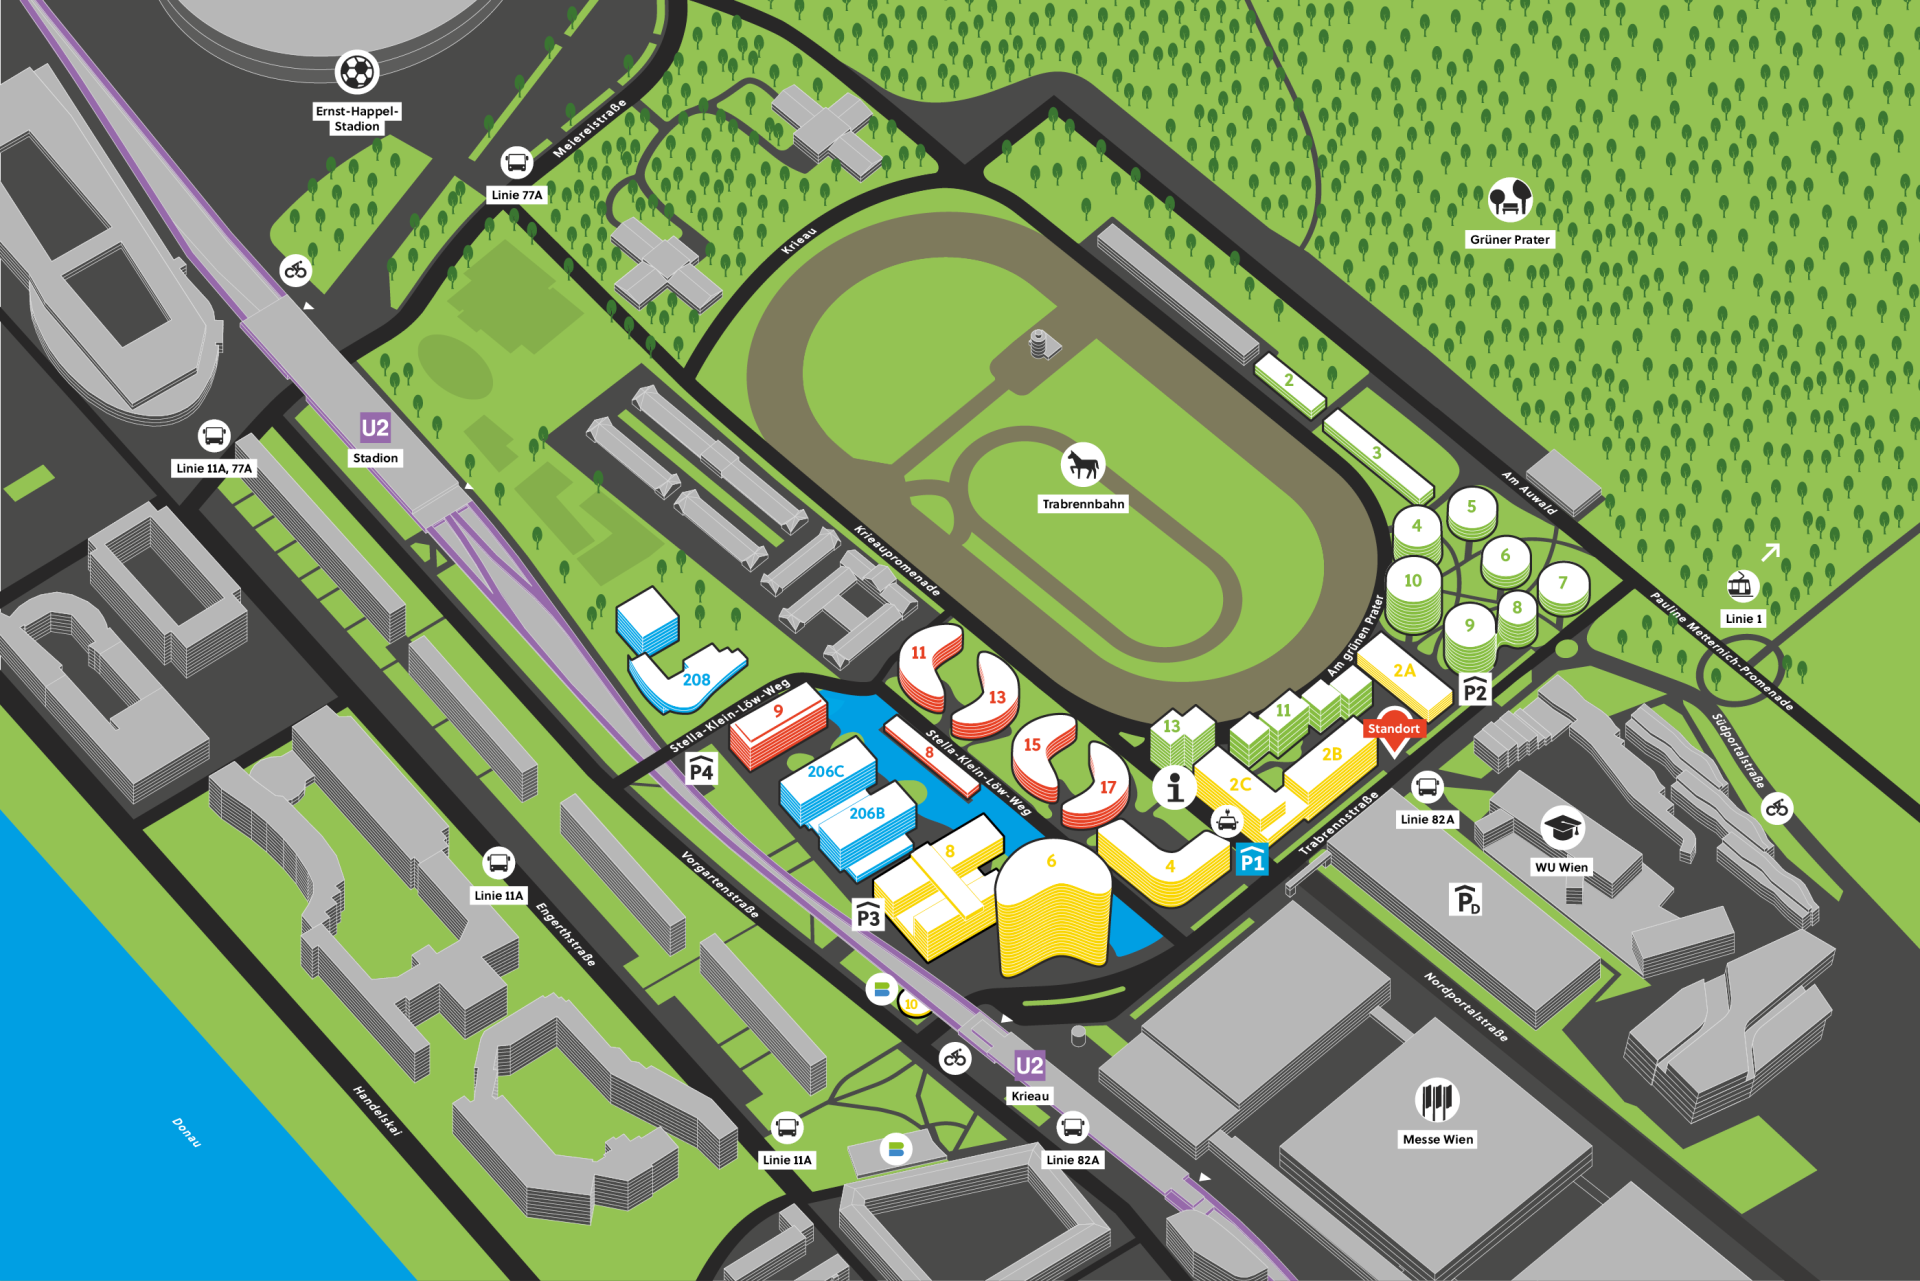 Site plan of the city district with buildings and surrounding green area